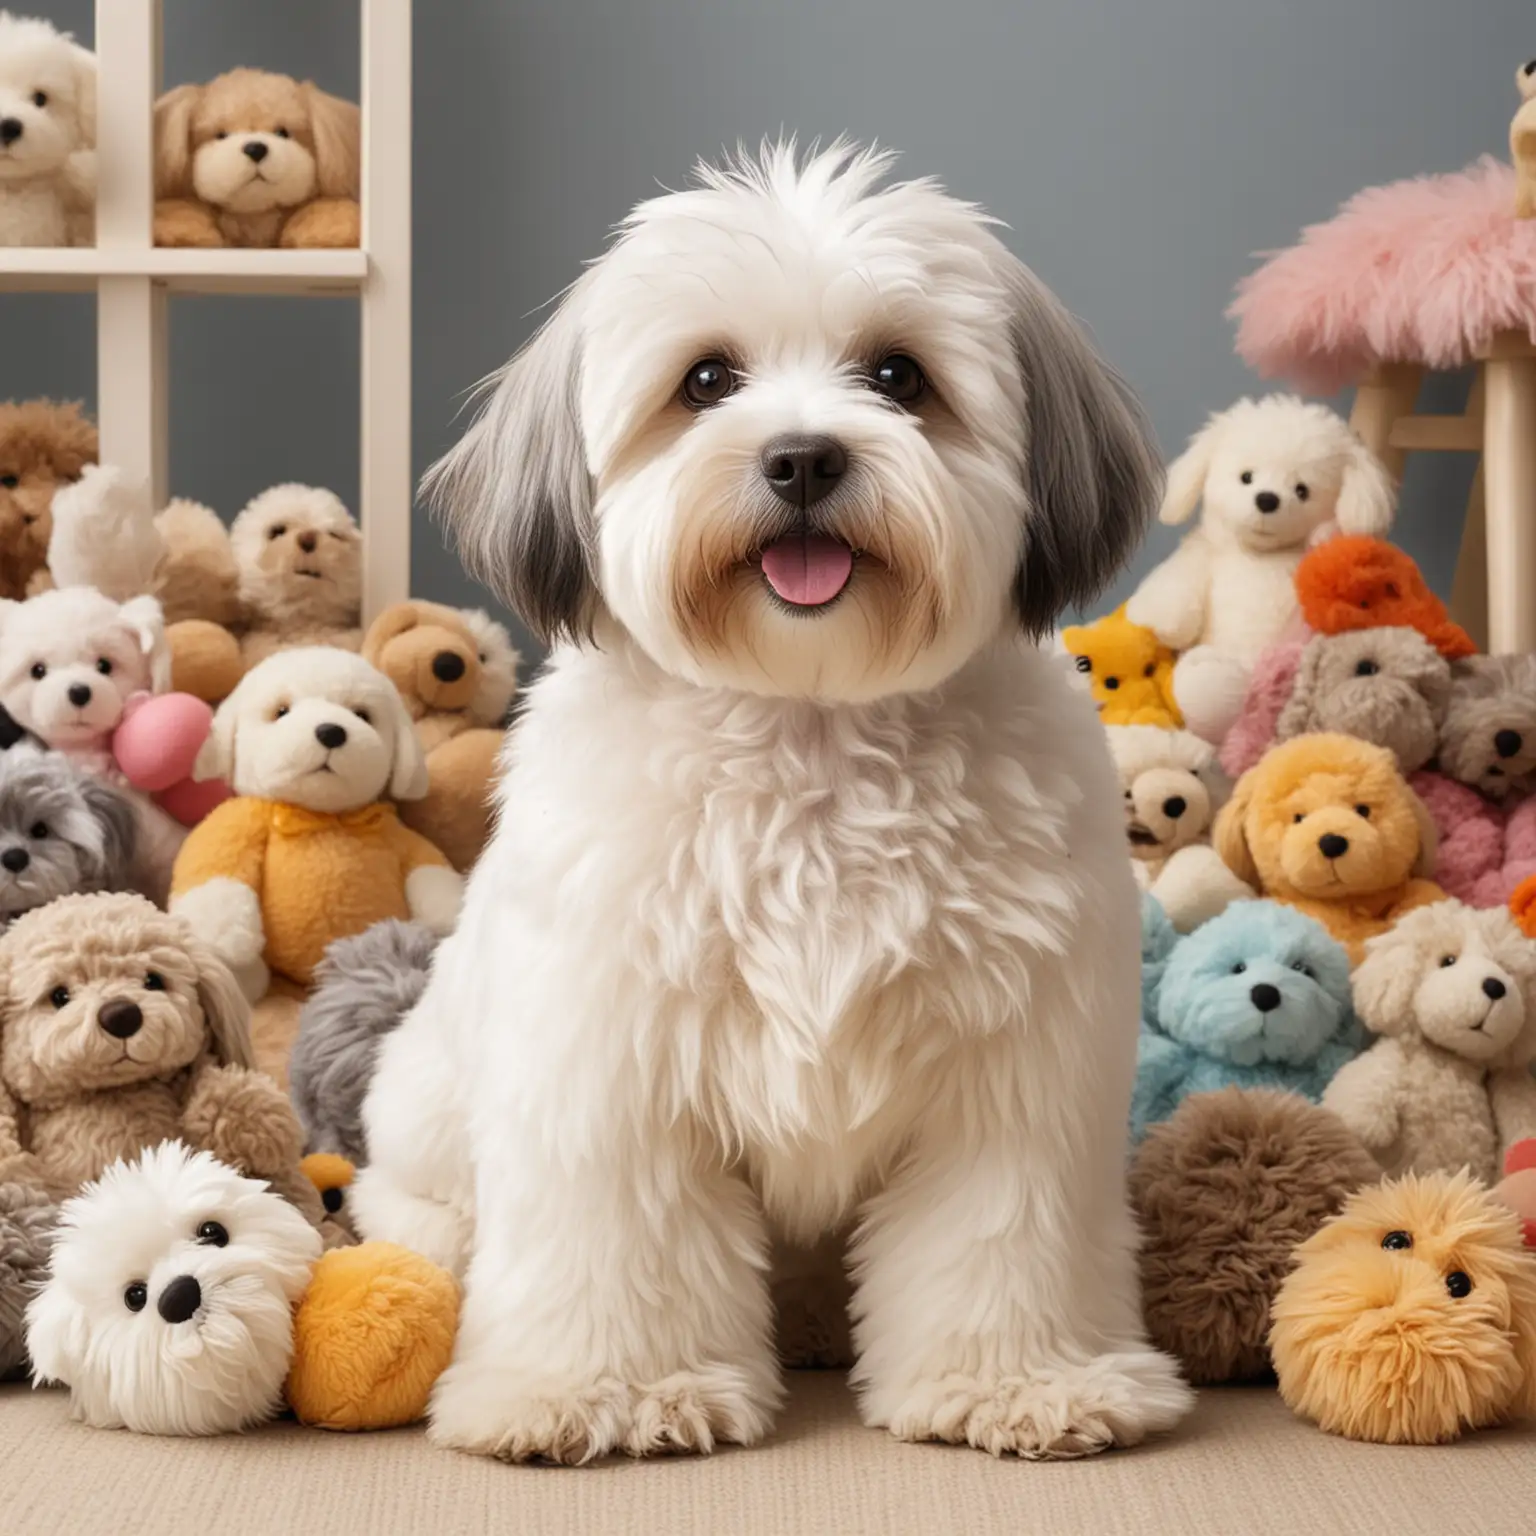 Adorable Havanese Dog Surrounded by Colorful Stuffed Toys in Playroom